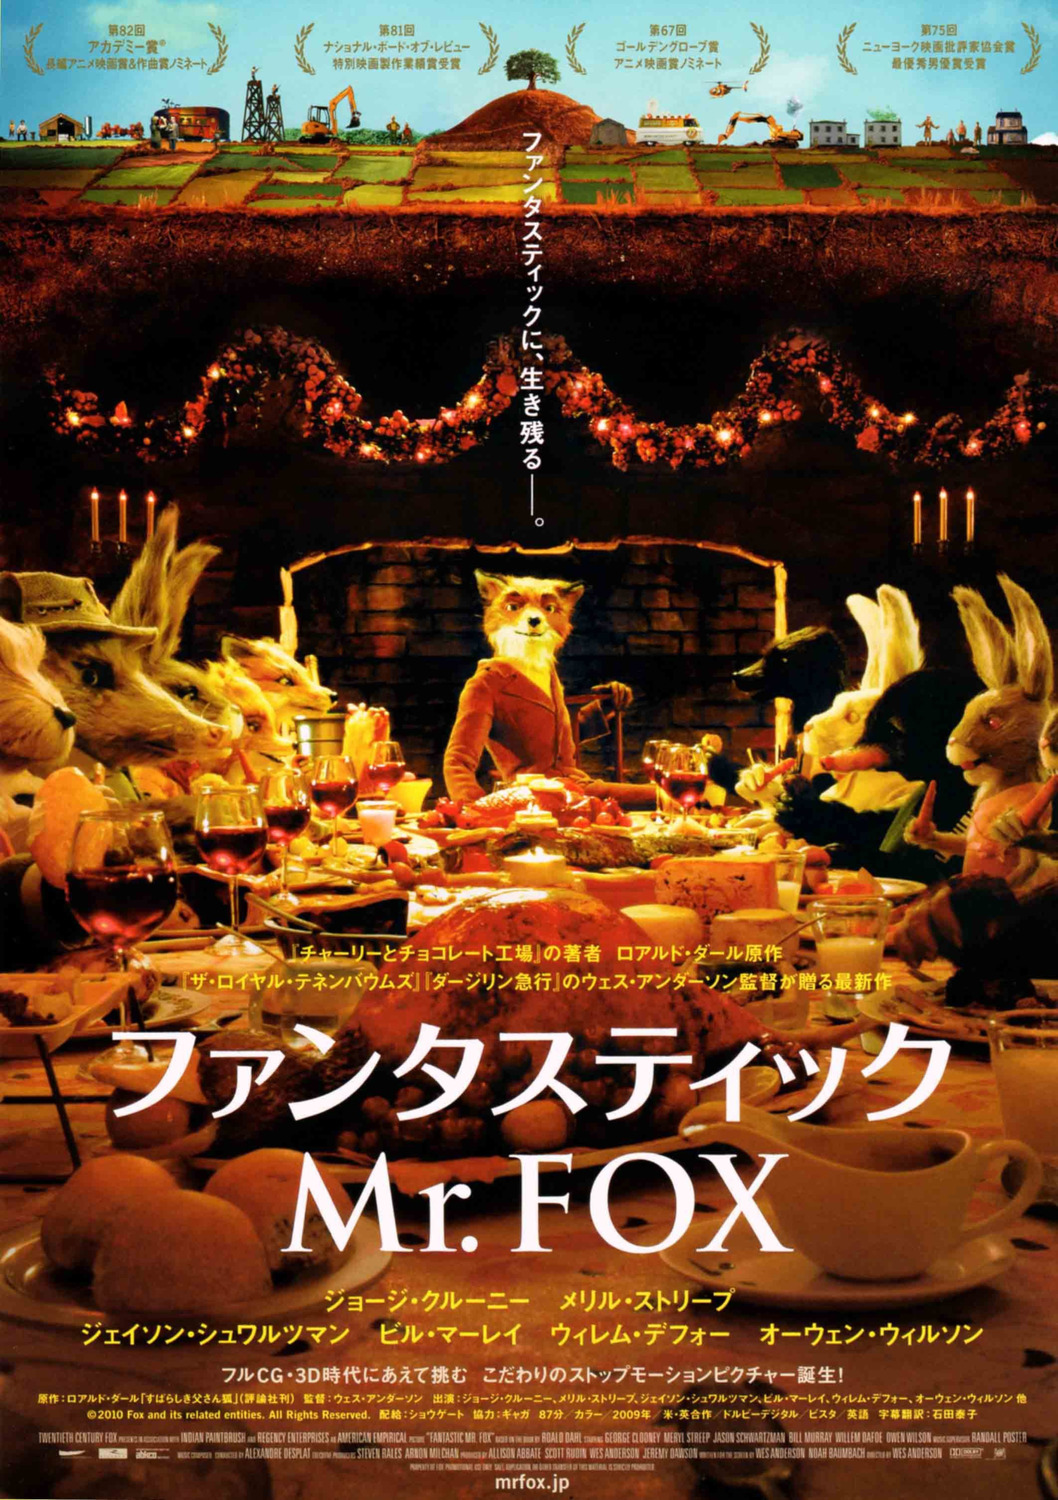 Extra Large Movie Poster Image for Fantastic Mr. Fox (#11 of 11)